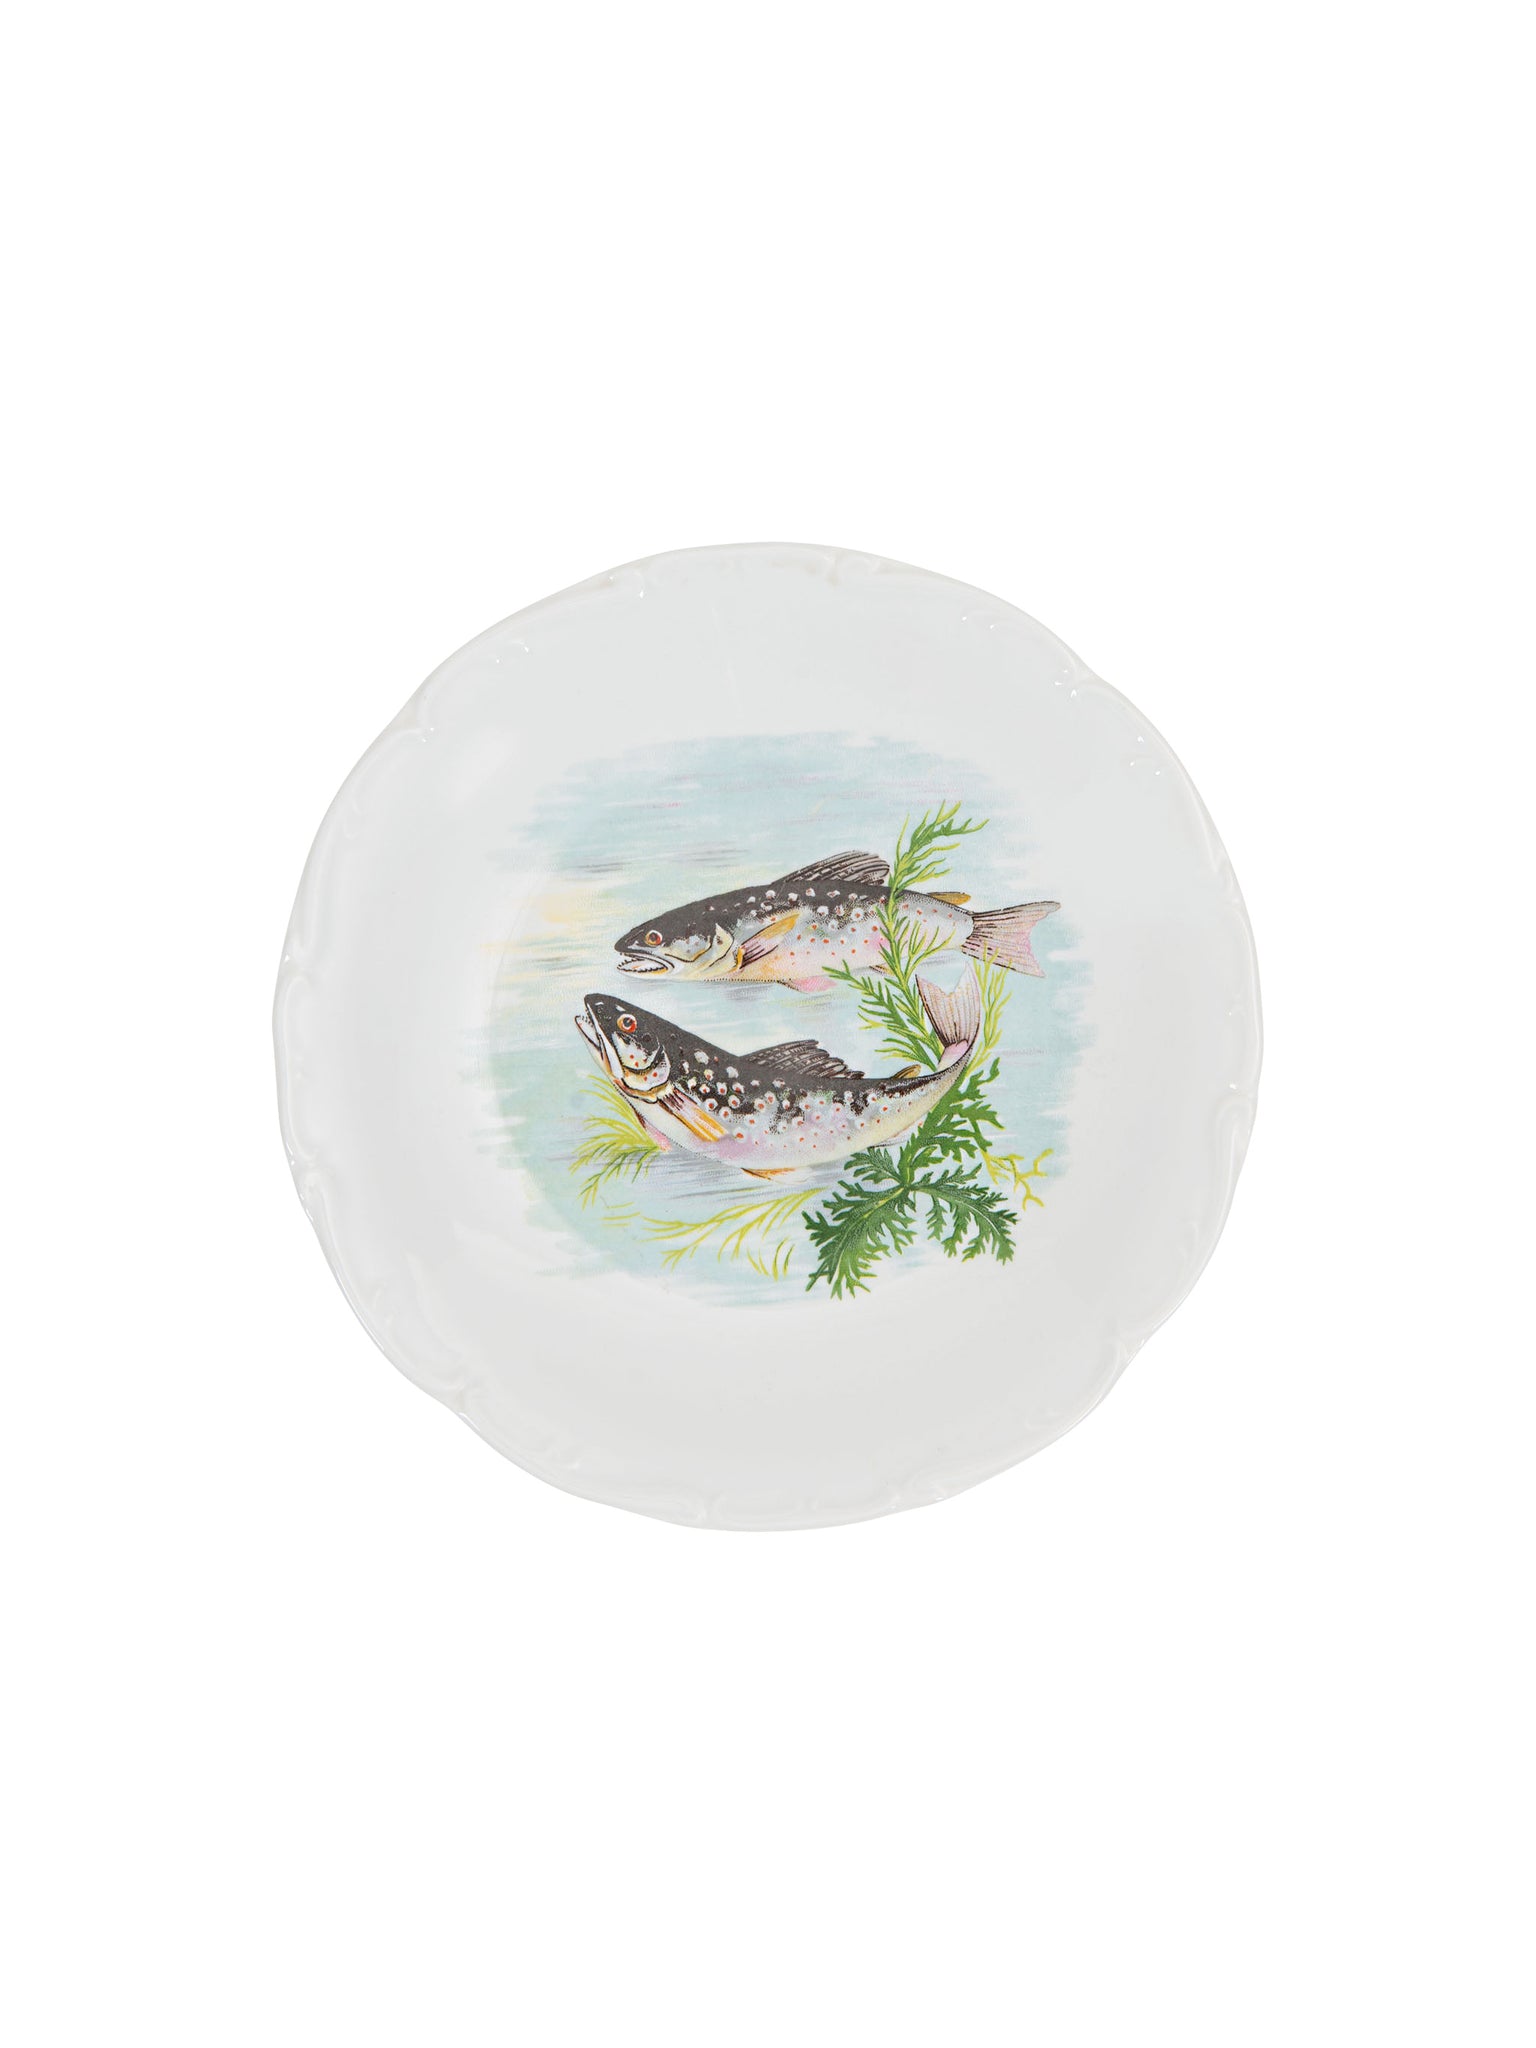 Vintage Sologne Fish Dinnerware Collection Plate 2 Weston Table